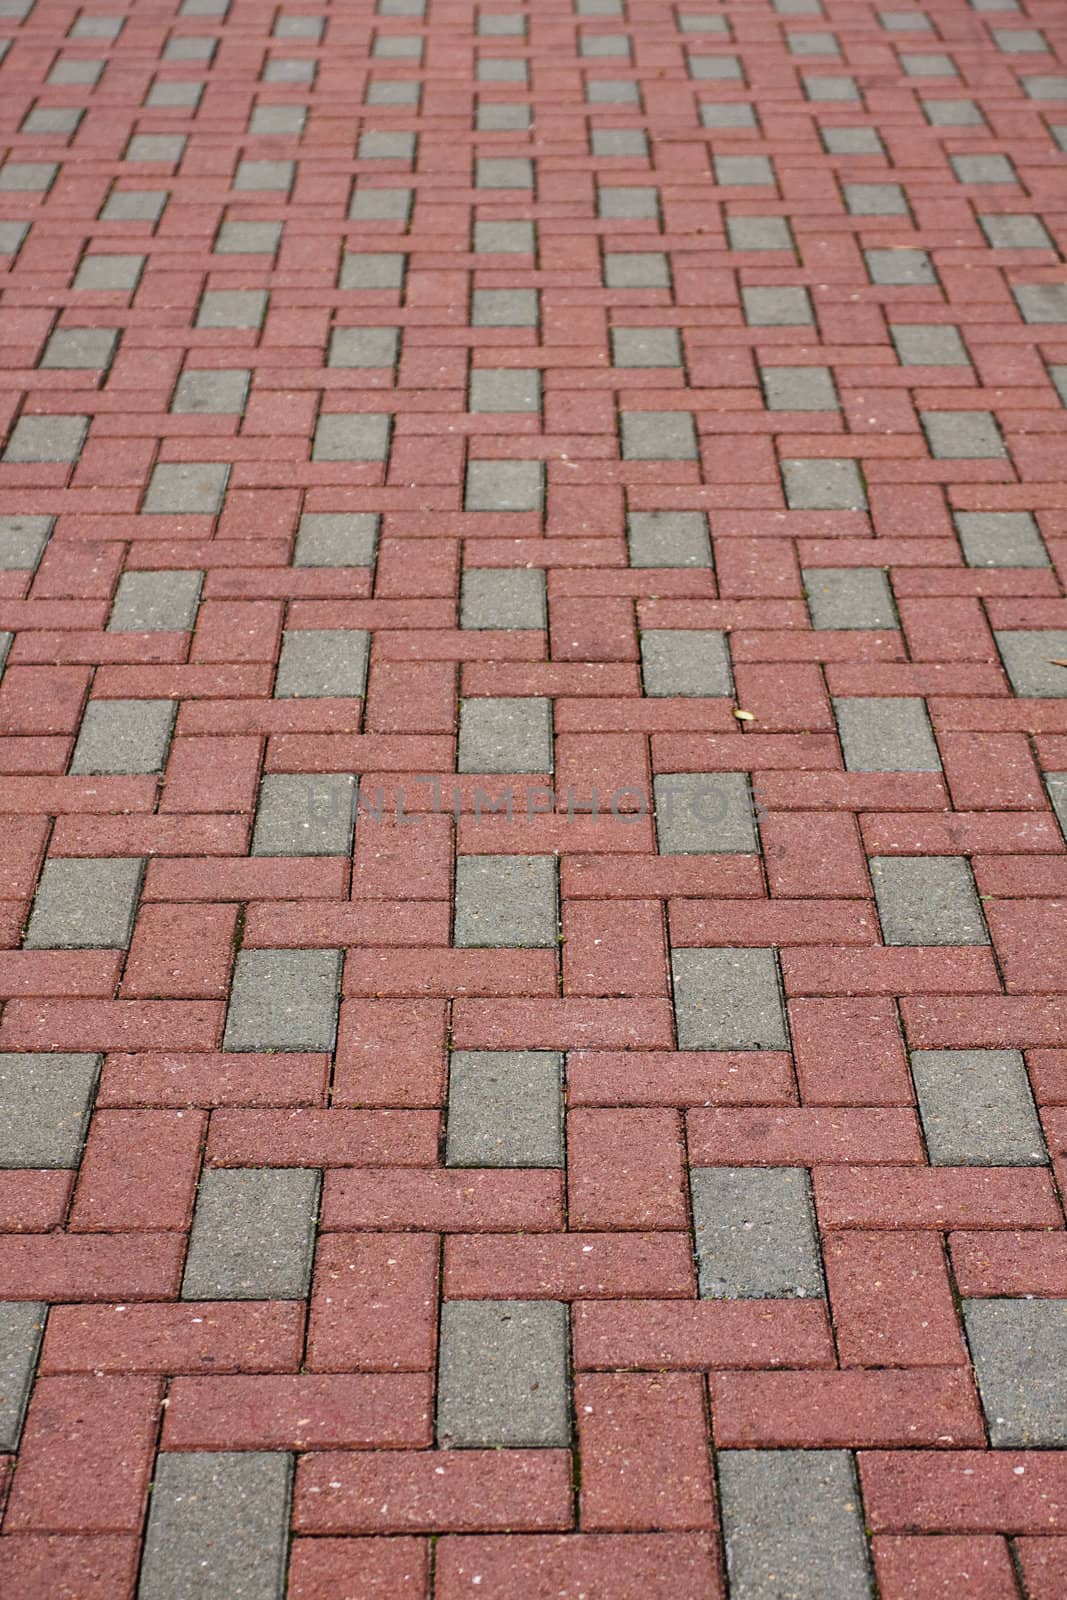 it is a Brick pavement in a city 
